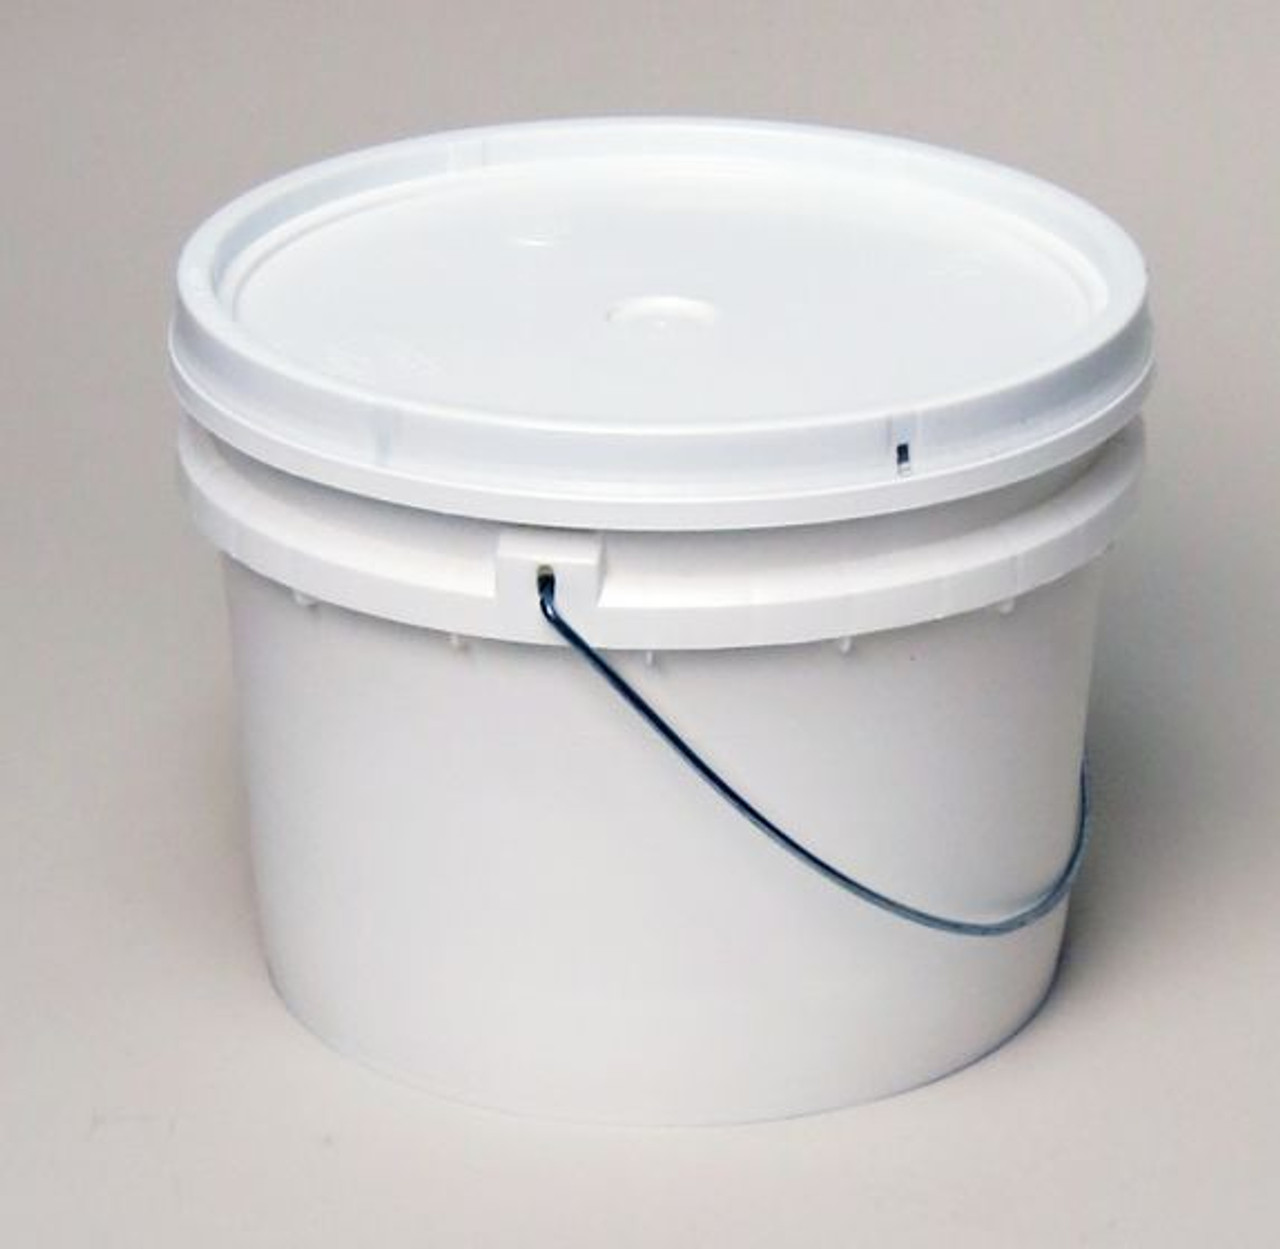 https://cdn11.bigcommerce.com/s-hfqent4fgs/images/stencil/1280x1280/products/2463/4106/1_gal_white_pail_and_lid-n2110w-g__68973.1585867331.jpg?c=1